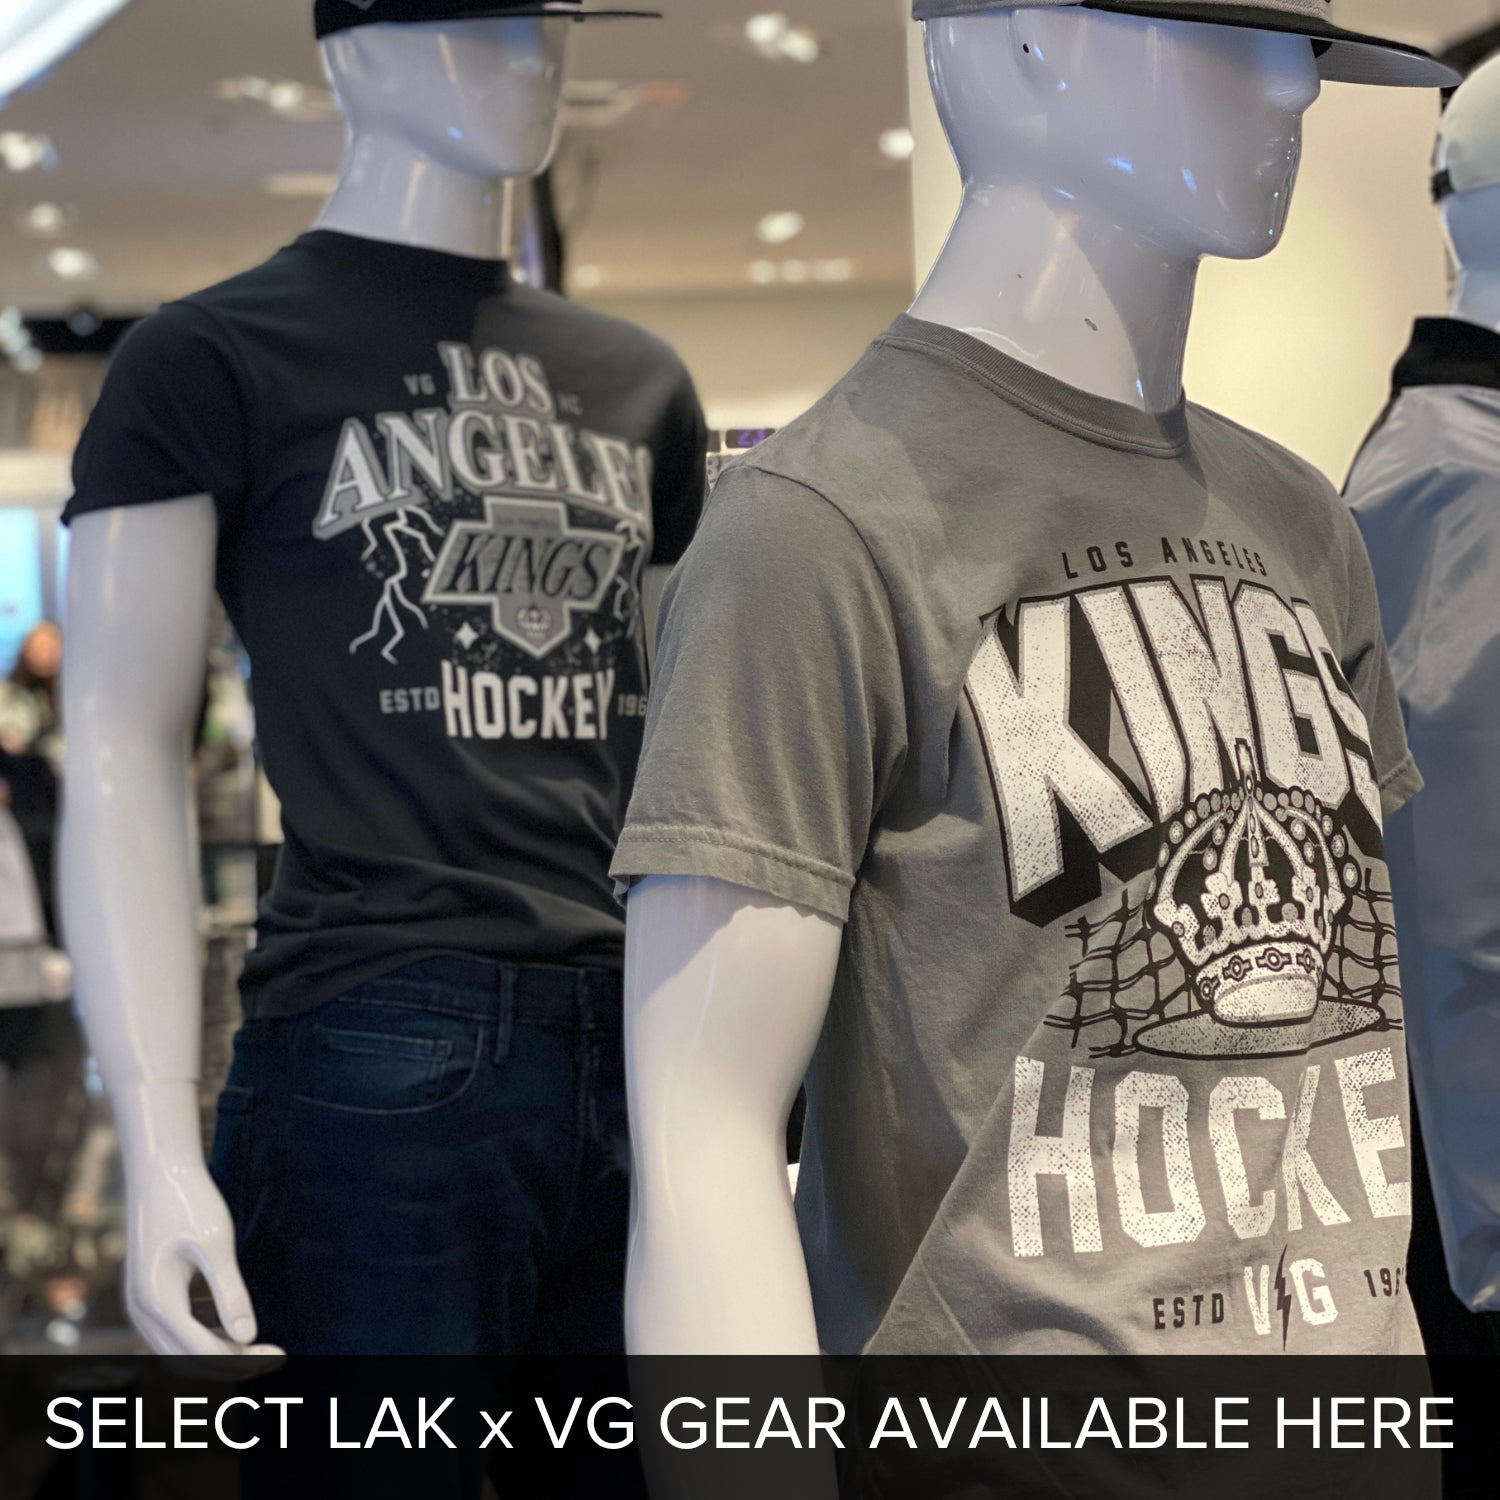 Orquest aedelweiss Hockey Clothing Company gets a group of fans together to go to a NHL Los Angles Kings LAK game and then skate on the ice after